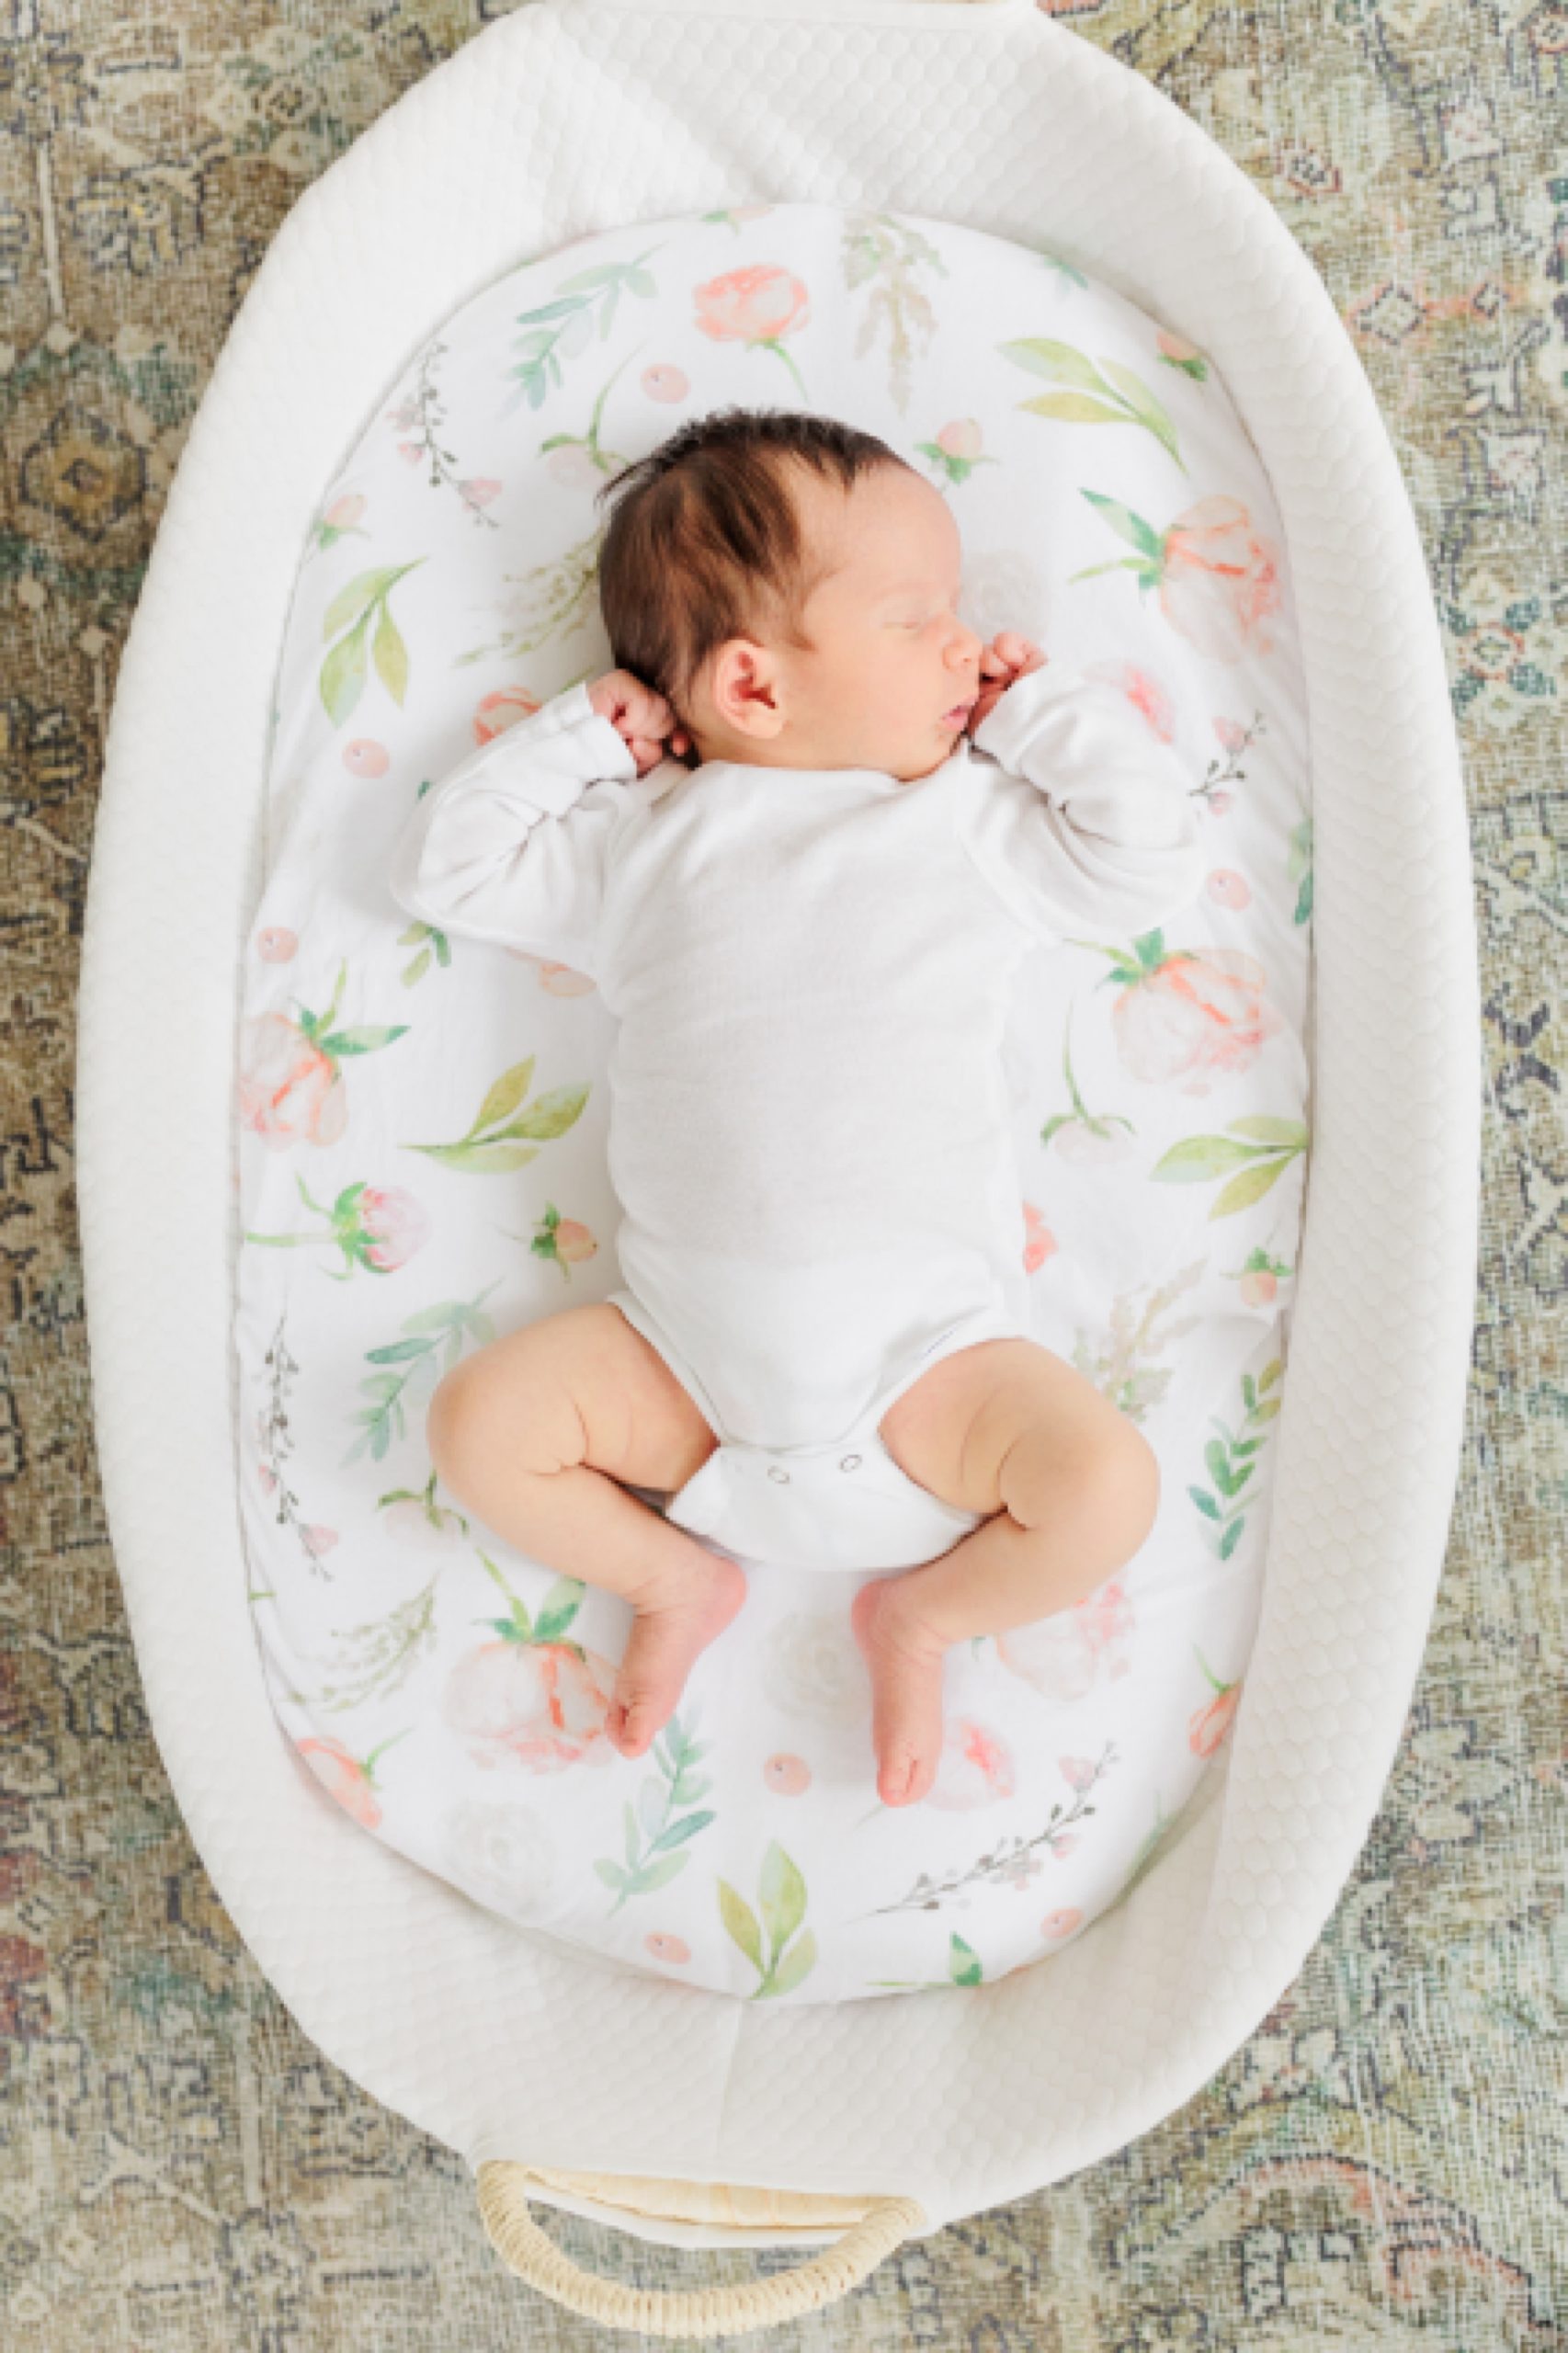 baby lays in bassinet in white onesie during lifestyle newborn session: outfit ideas for lifestyle newborn photos